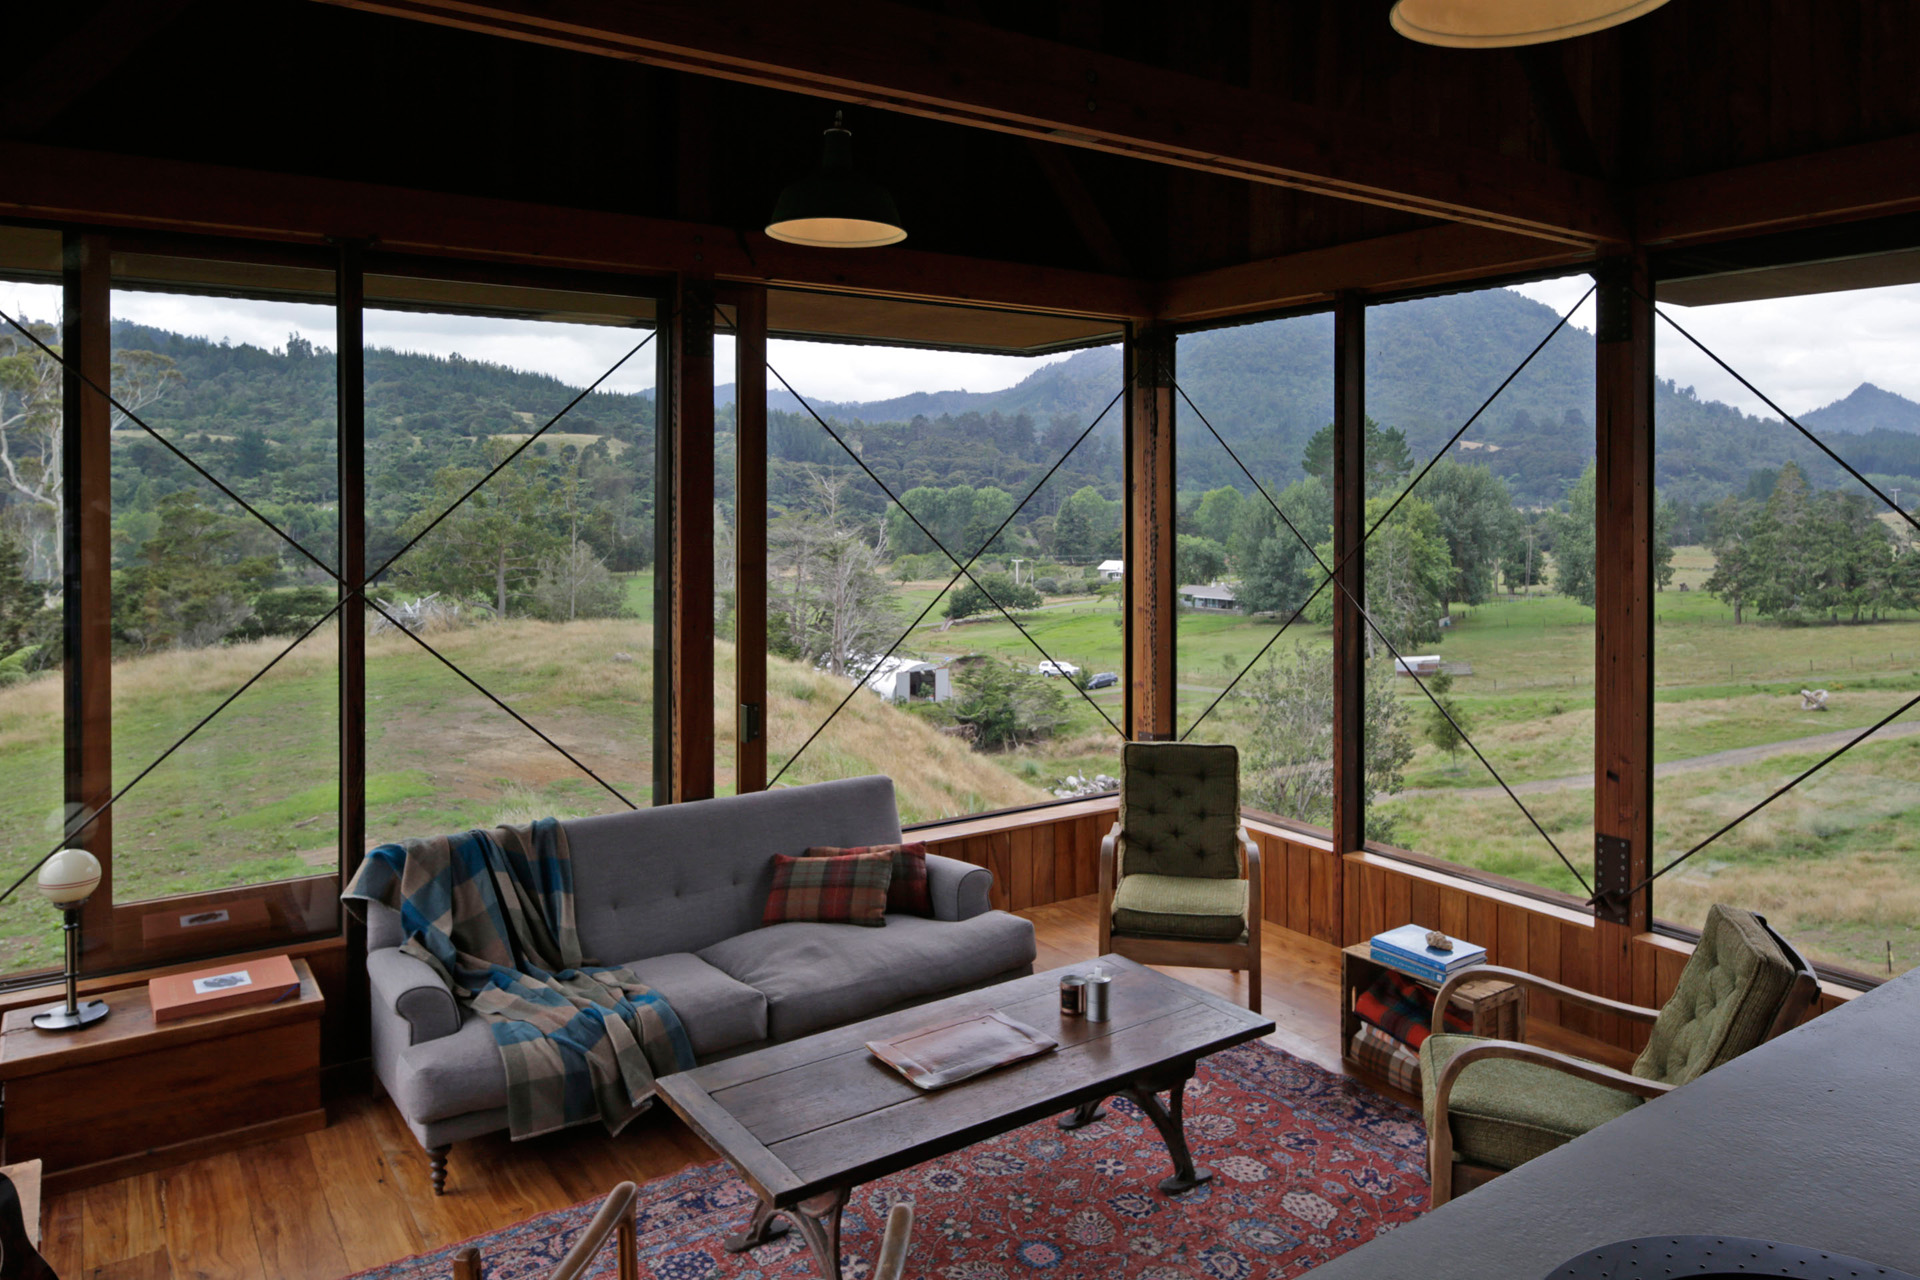 The home's living room offers views of the valley. Photo by Patrick Reynolds.